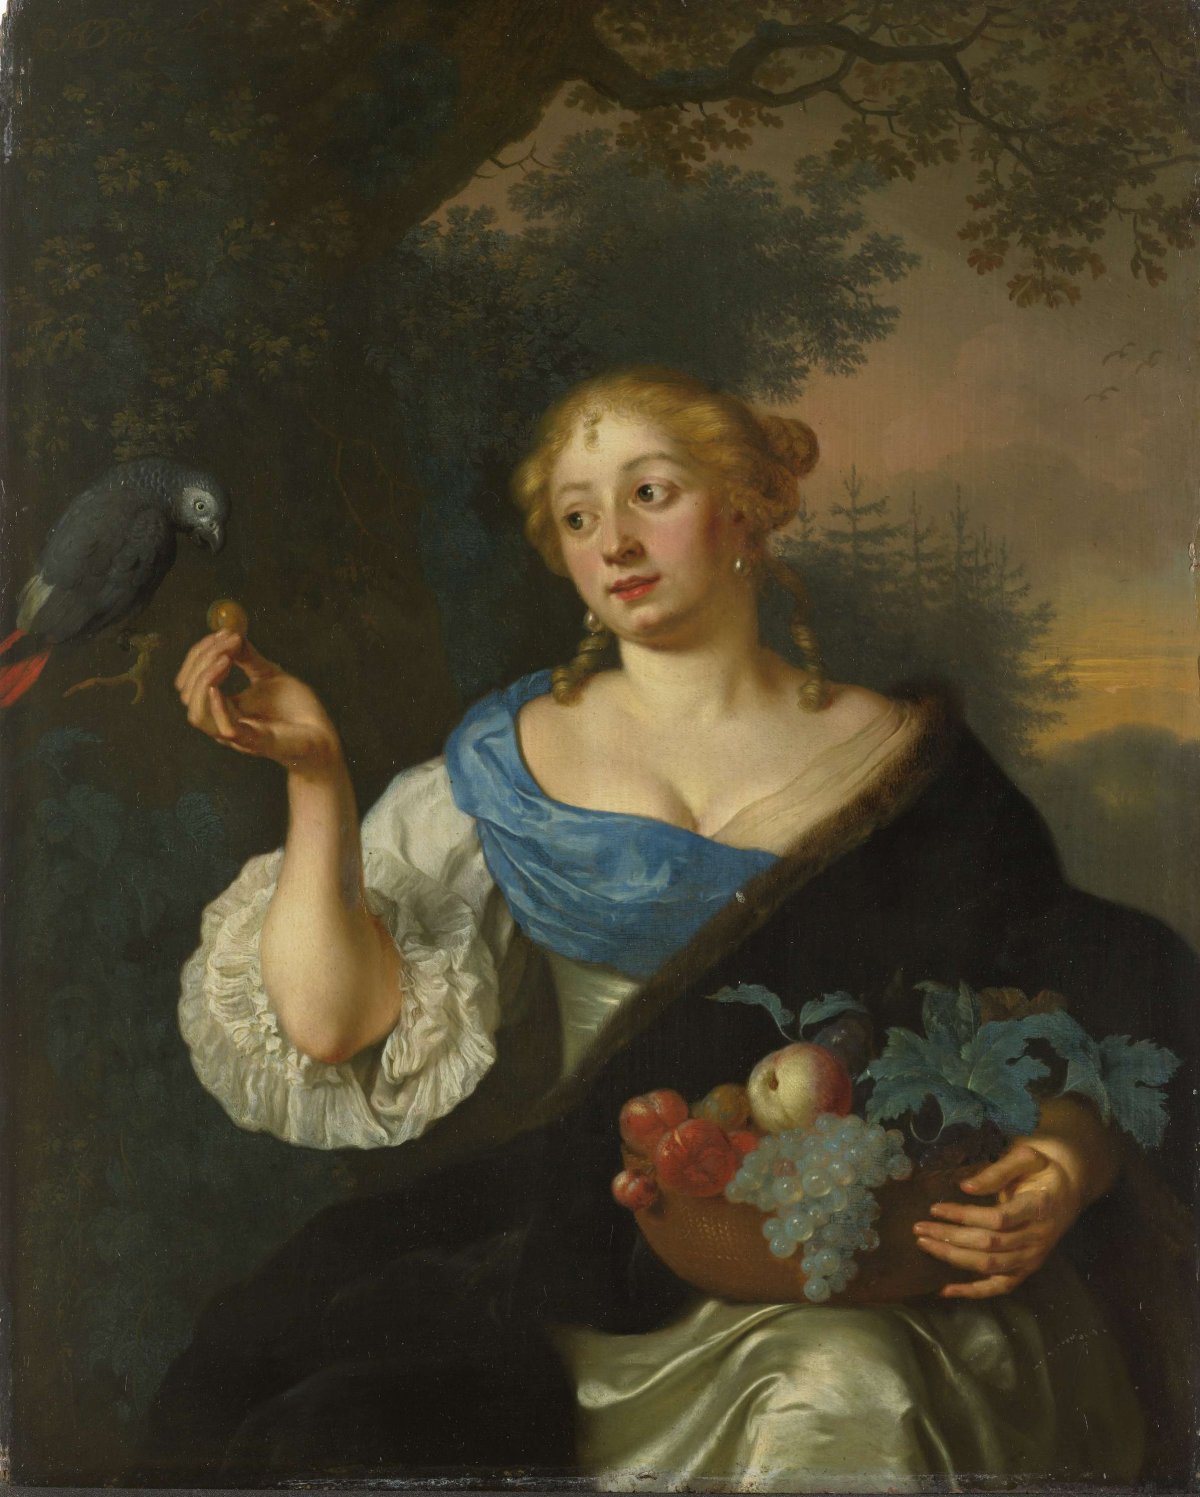 A young Woman with a Parrot, Ary de Vois, 1660 - 1680